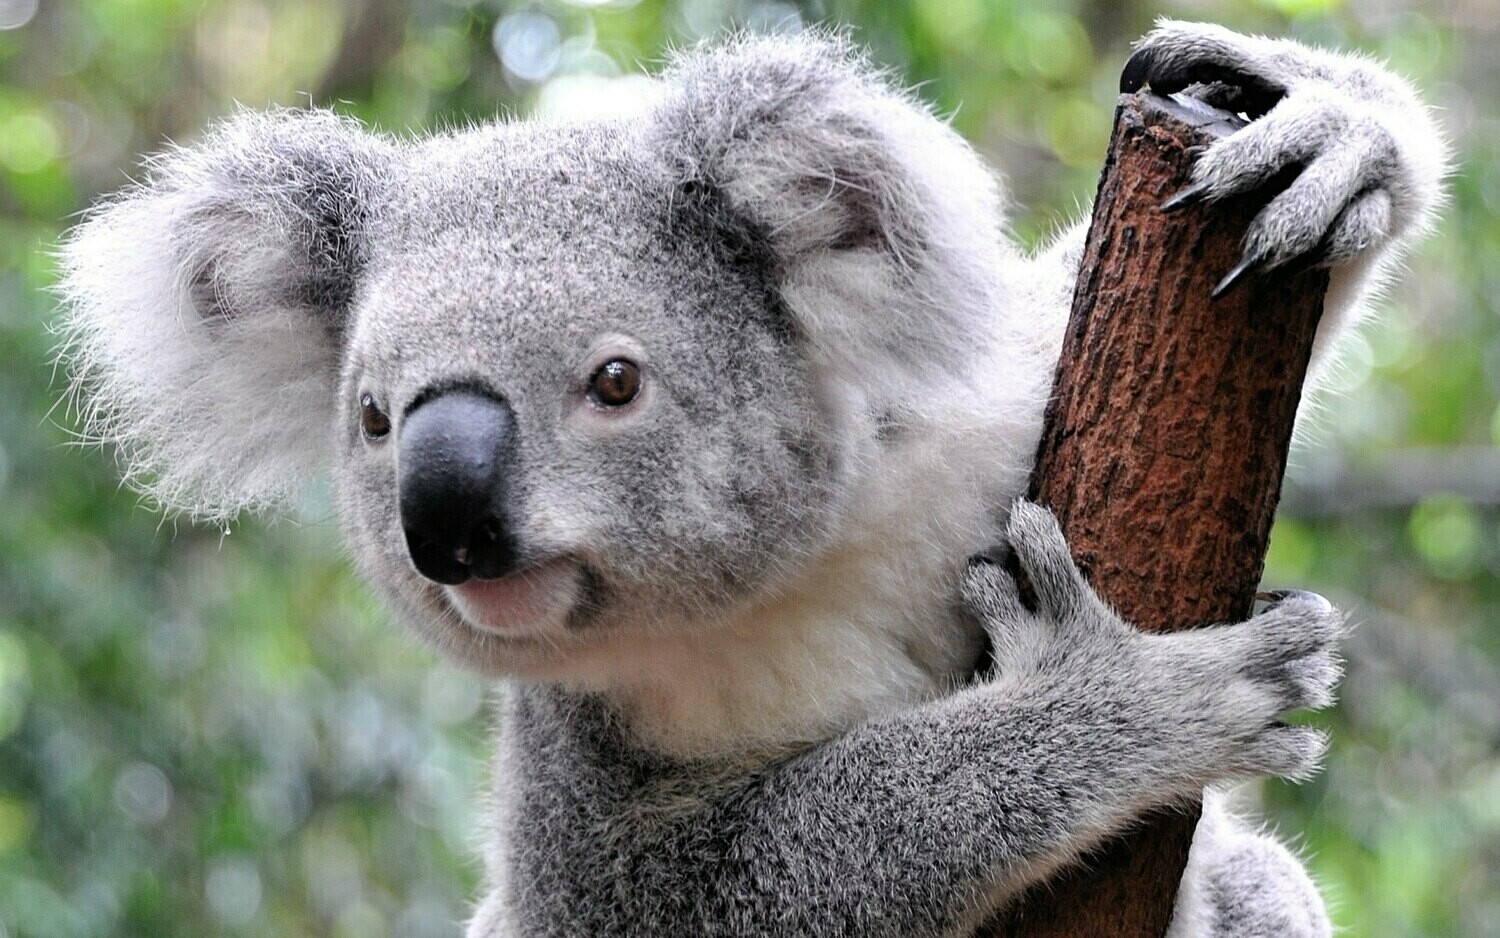 Koala 3 - Specially ordered for you. Delivery is approximately 4 - 6 weeks.